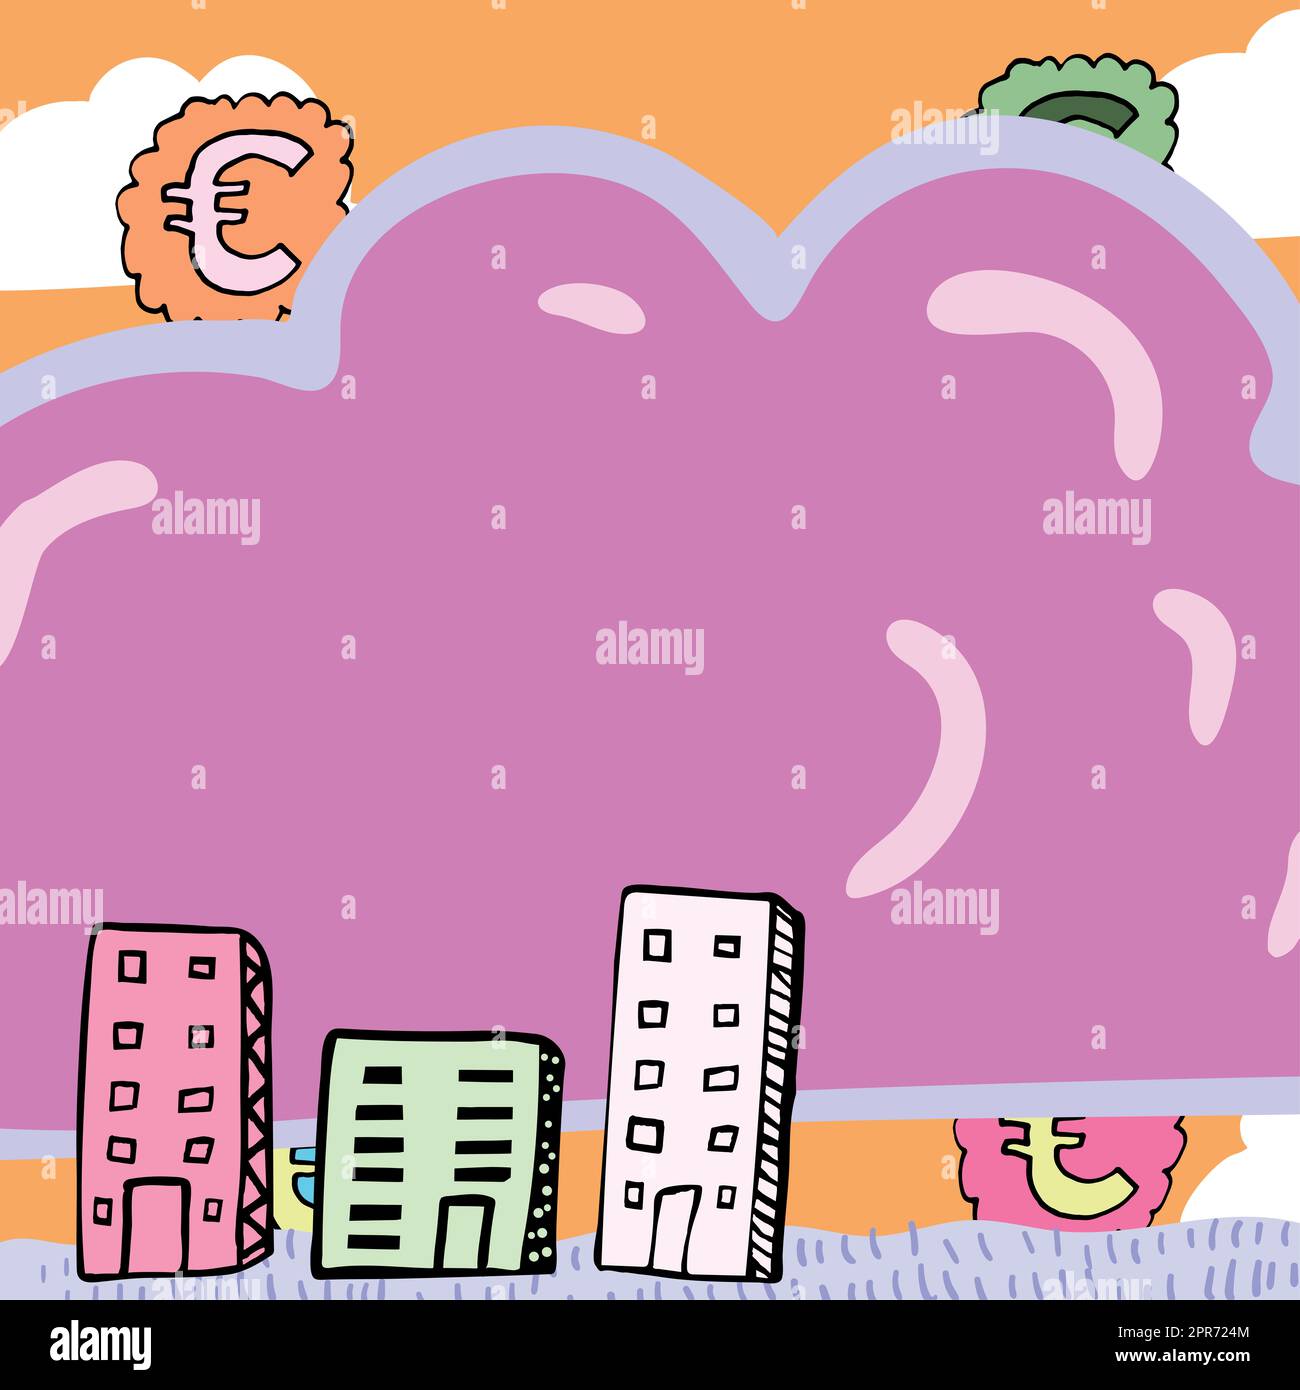 Important Message Written In Shape Of Cloud With Euro Signs In Background And Buildings. Crutial Informations In Cloudy Form With Symbols And Houses Around. Stock Photo